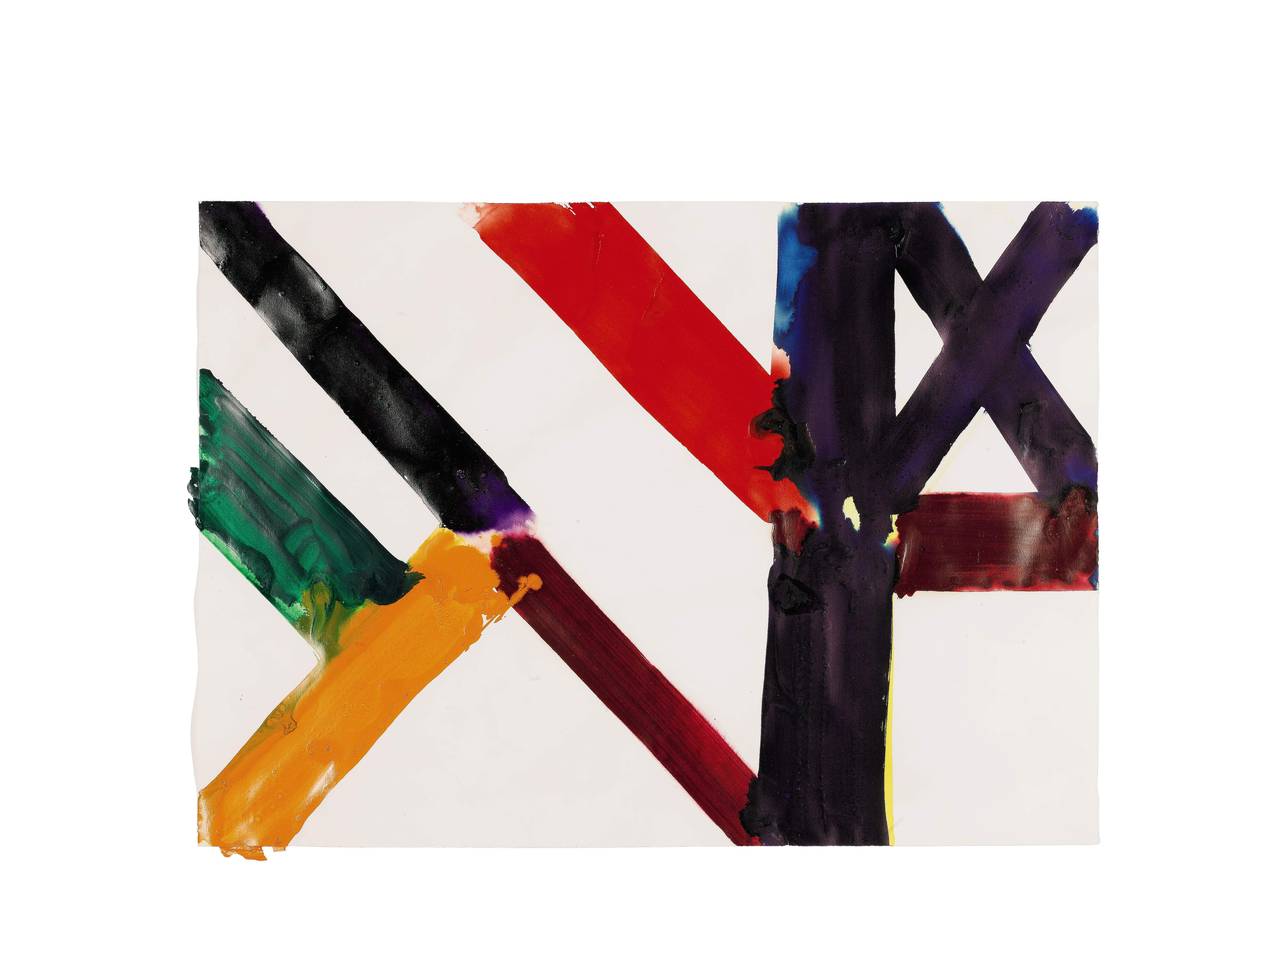 Untitled, SF79-101, 1979 - Painting by Sam Francis